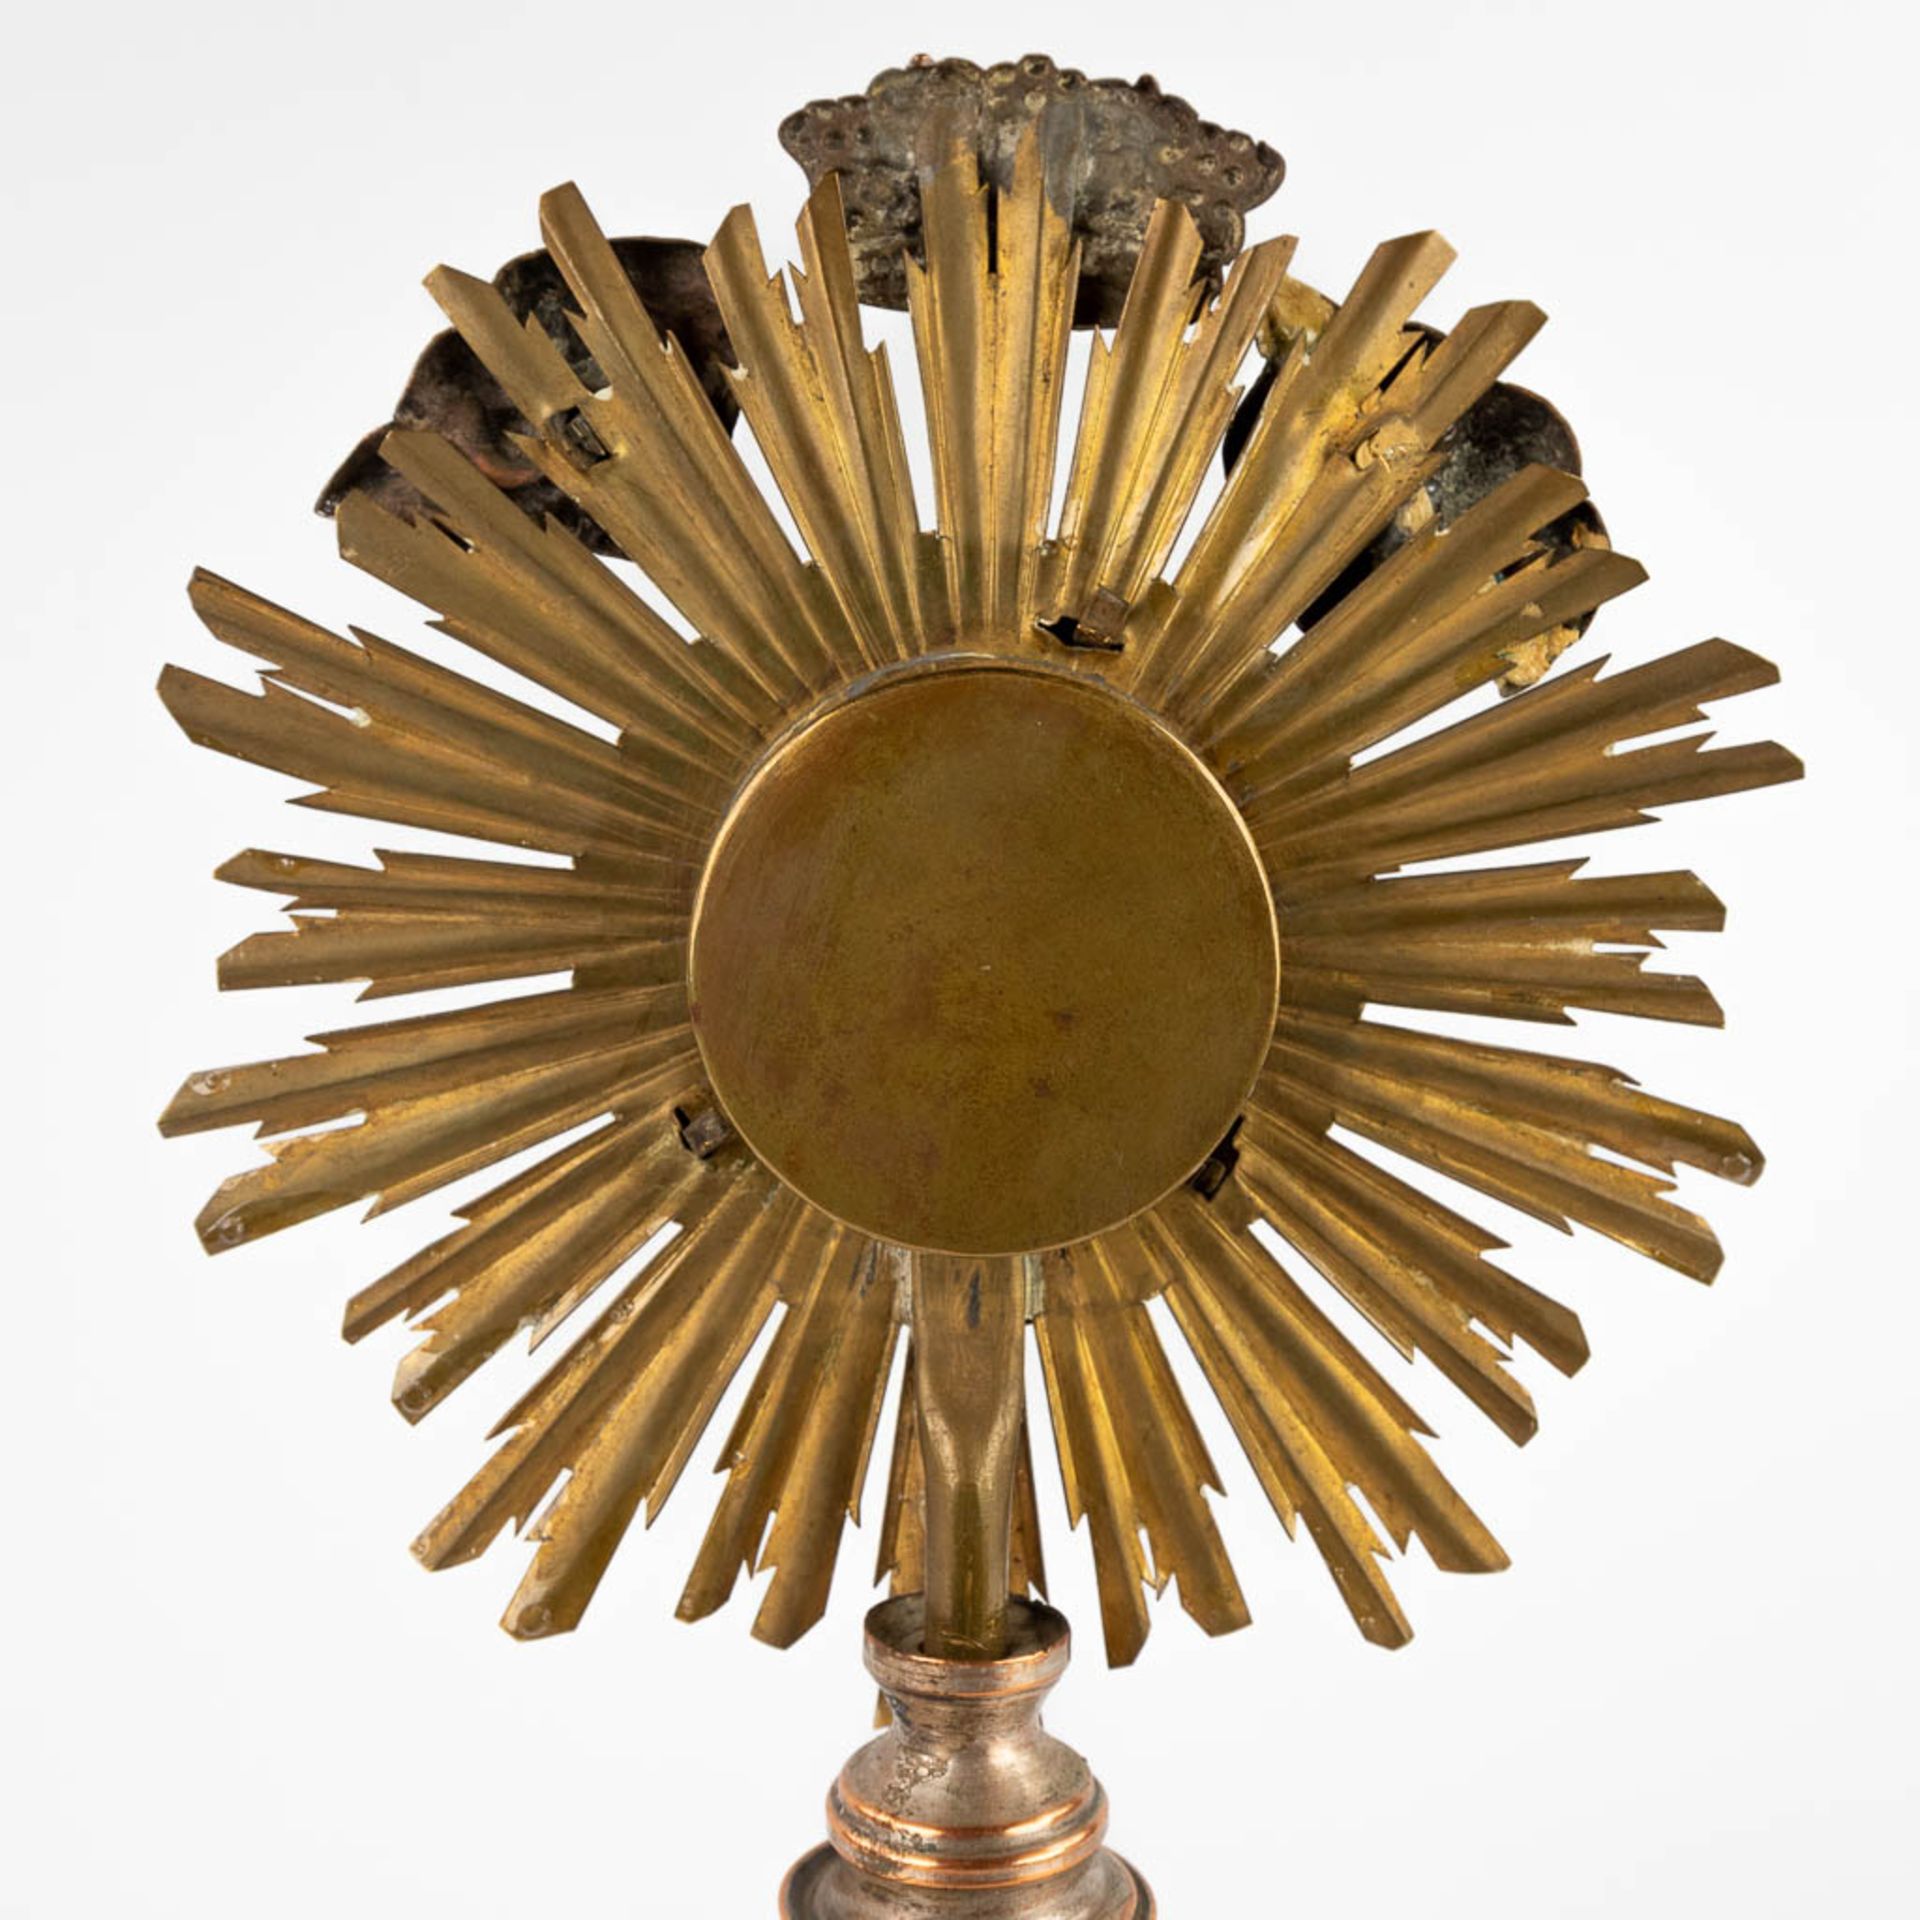 A small sunburst monstrance with a relic of the true cross. (D:11 x W:16 x H:29 cm) - Image 11 of 12